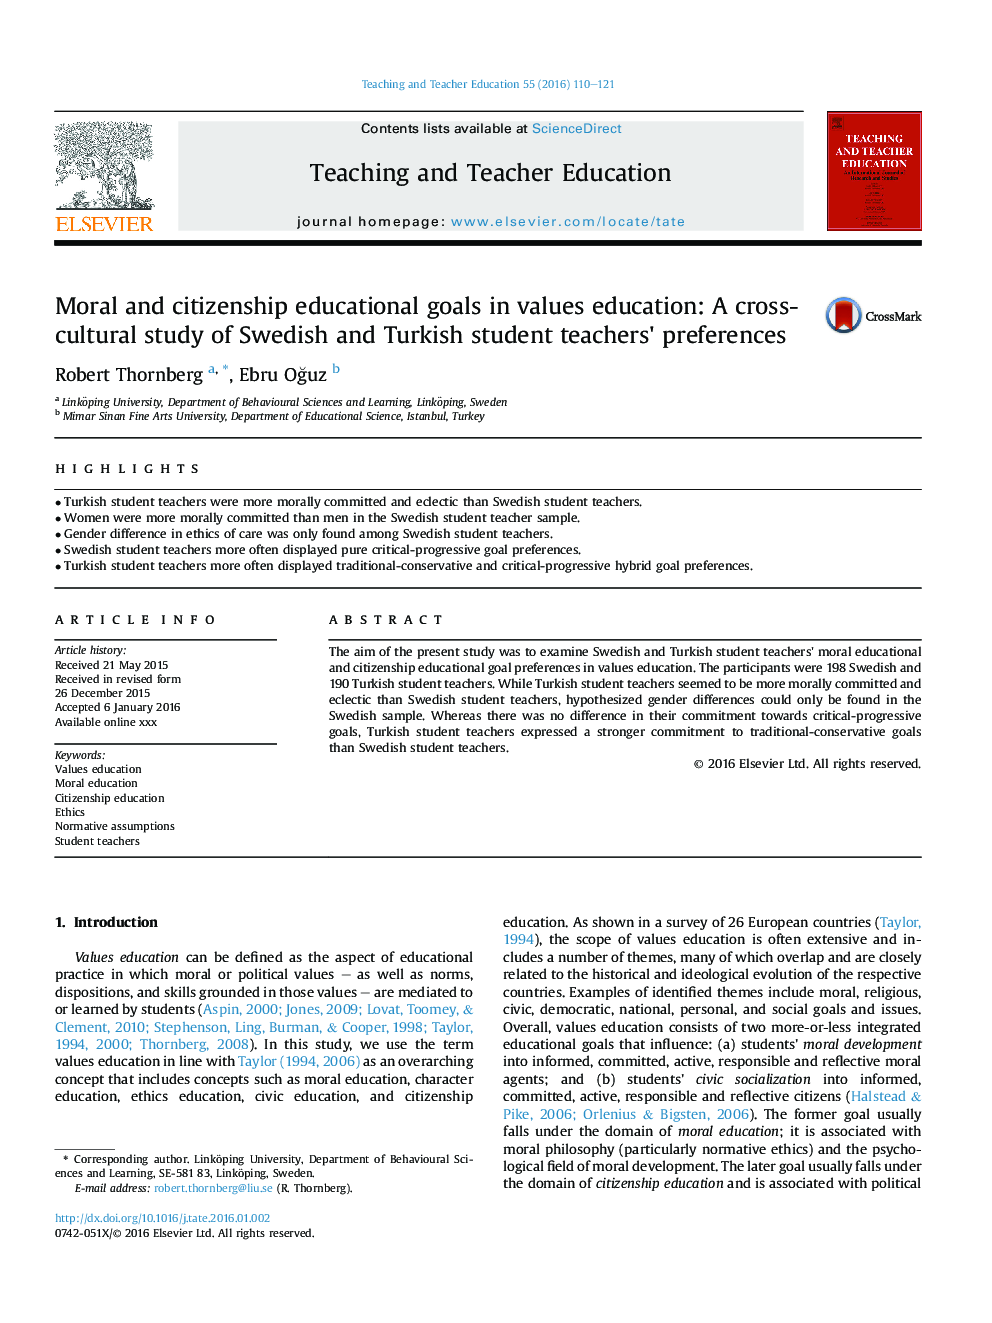 Moral and citizenship educational goals in values education: A cross-cultural study ofÂ Swedish and Turkish student teachers' preferences